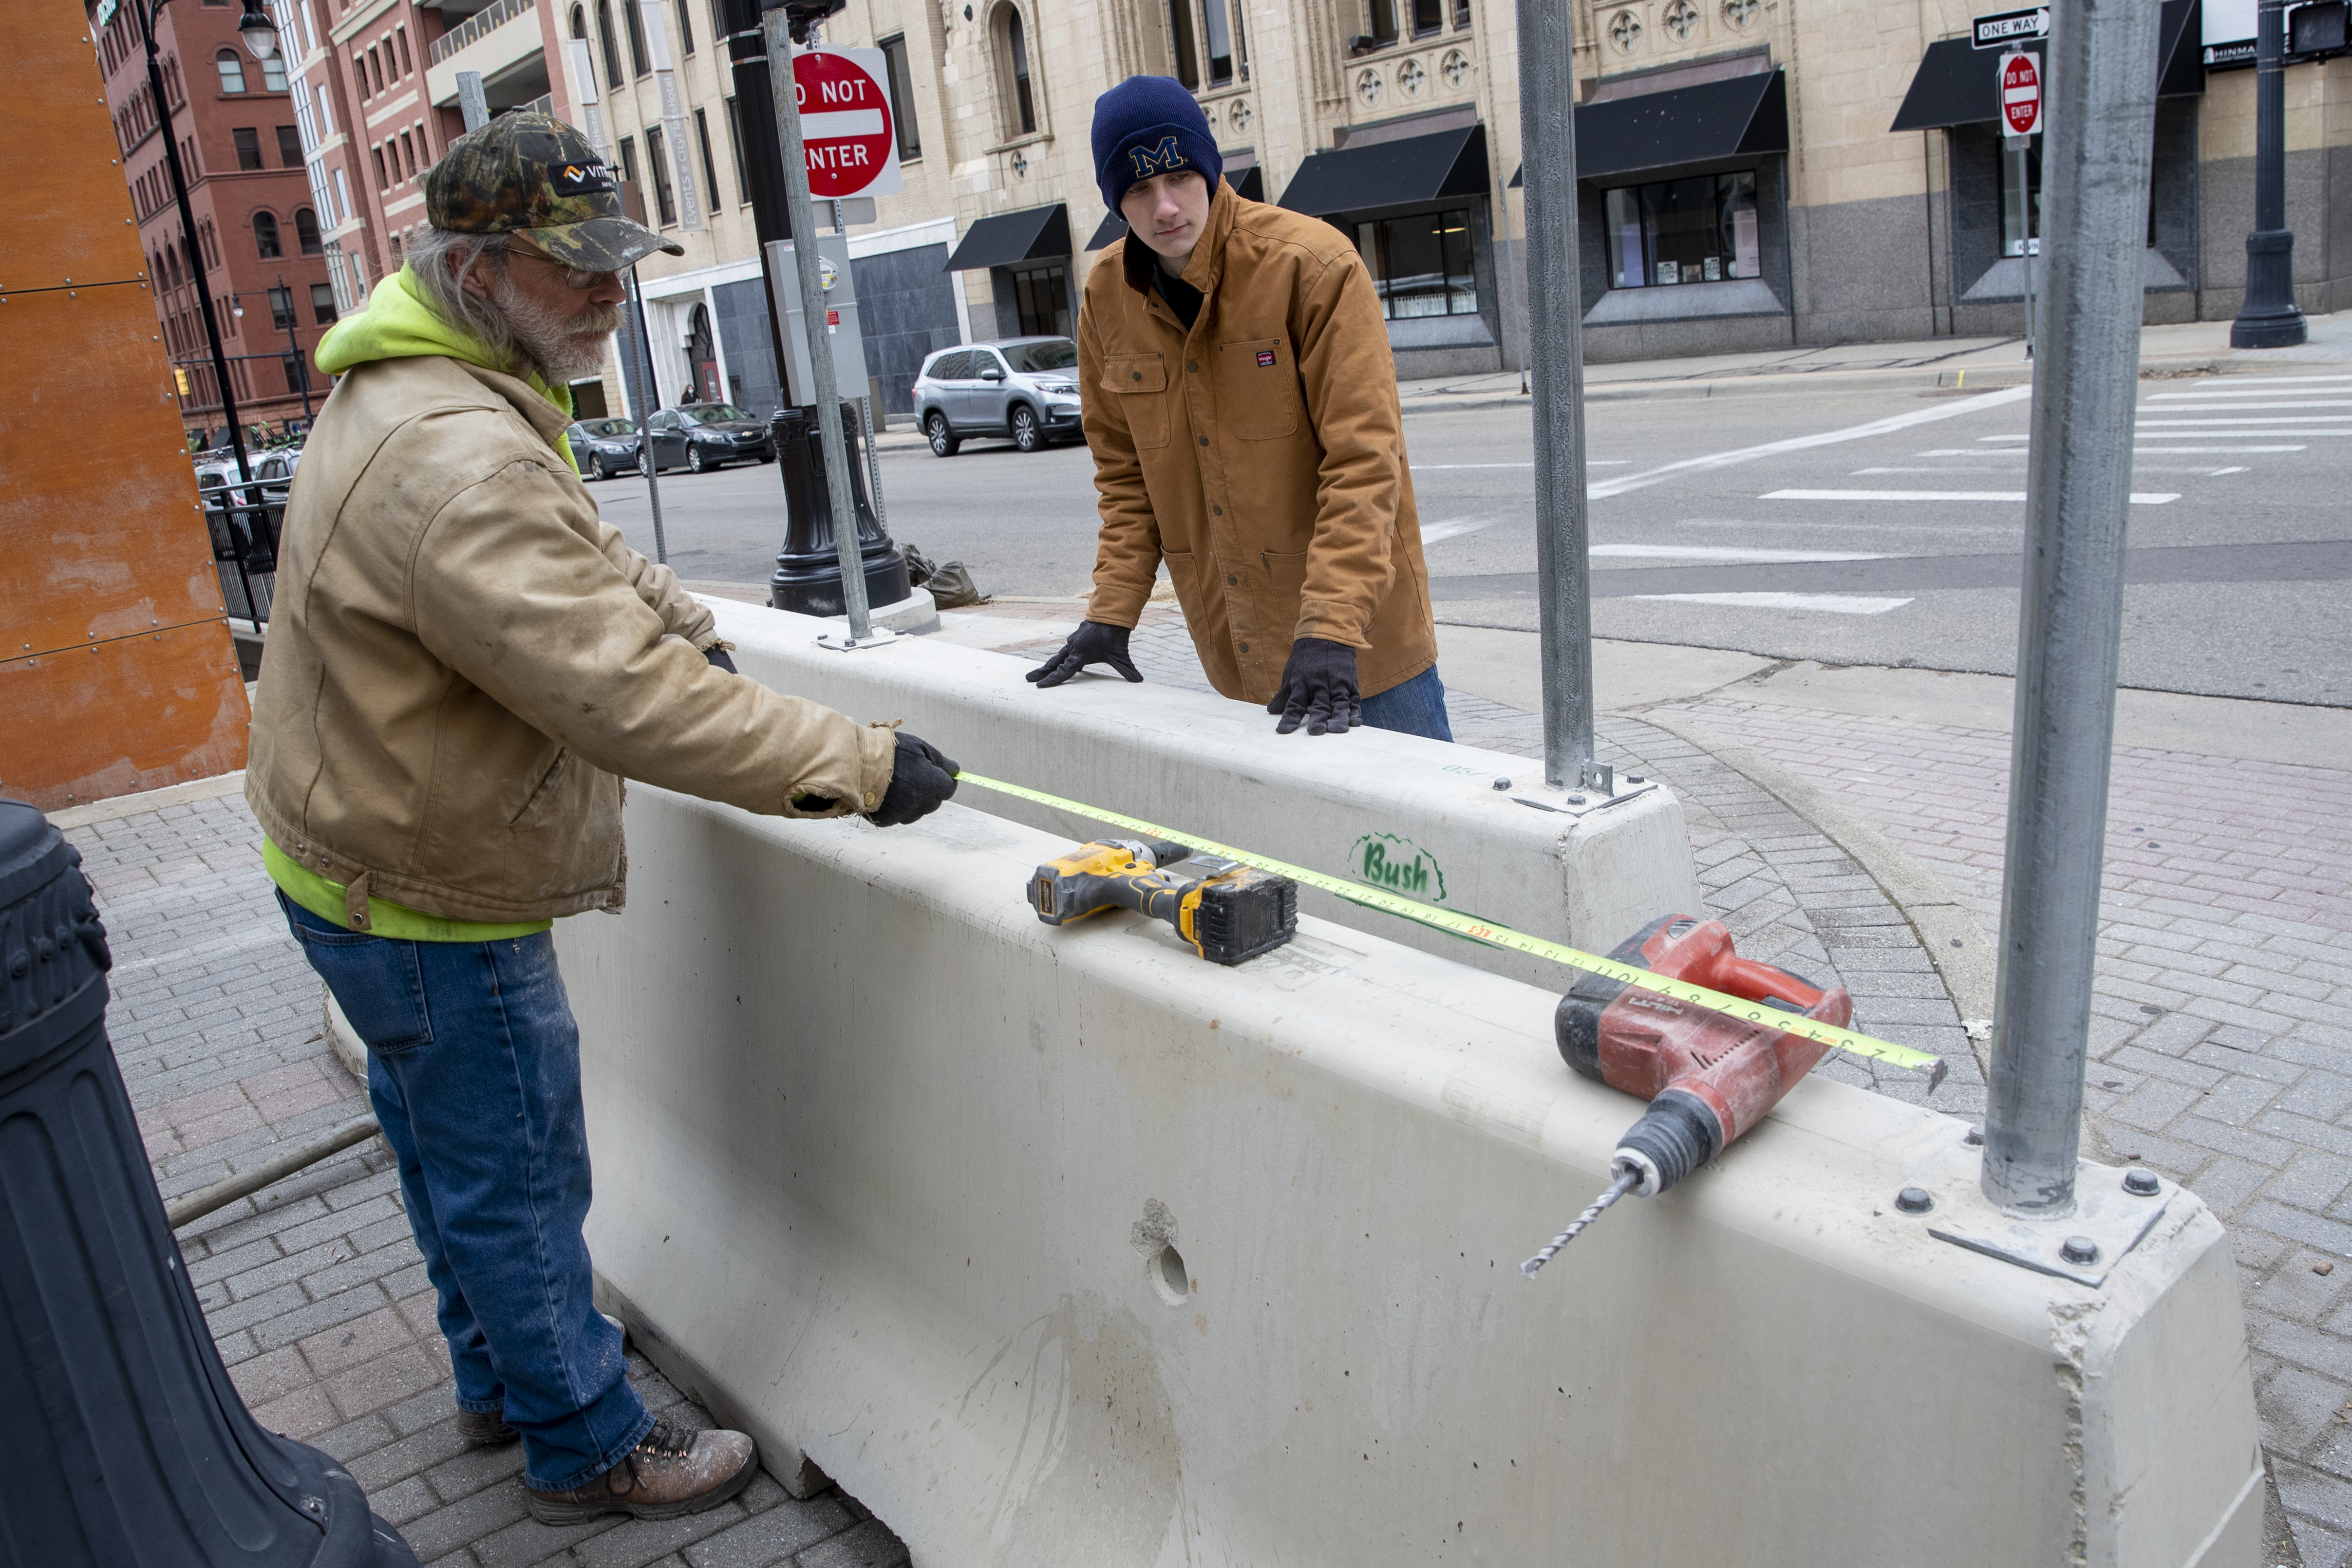 Mike Jack, left, and Cole Bond, from Fence Consultants of West Michigan, put up barricades in downtown Grand Rapids on Tuesday, April 20, 2021, as a jury deliberates fate of Derek Chauvin in death of George Floyd. A riot on May 30, 2020, caused significant property damage in the aftermath of a peaceful protest following the death of Floyd in Minneapolis. (Cory Morse | MLive.com)